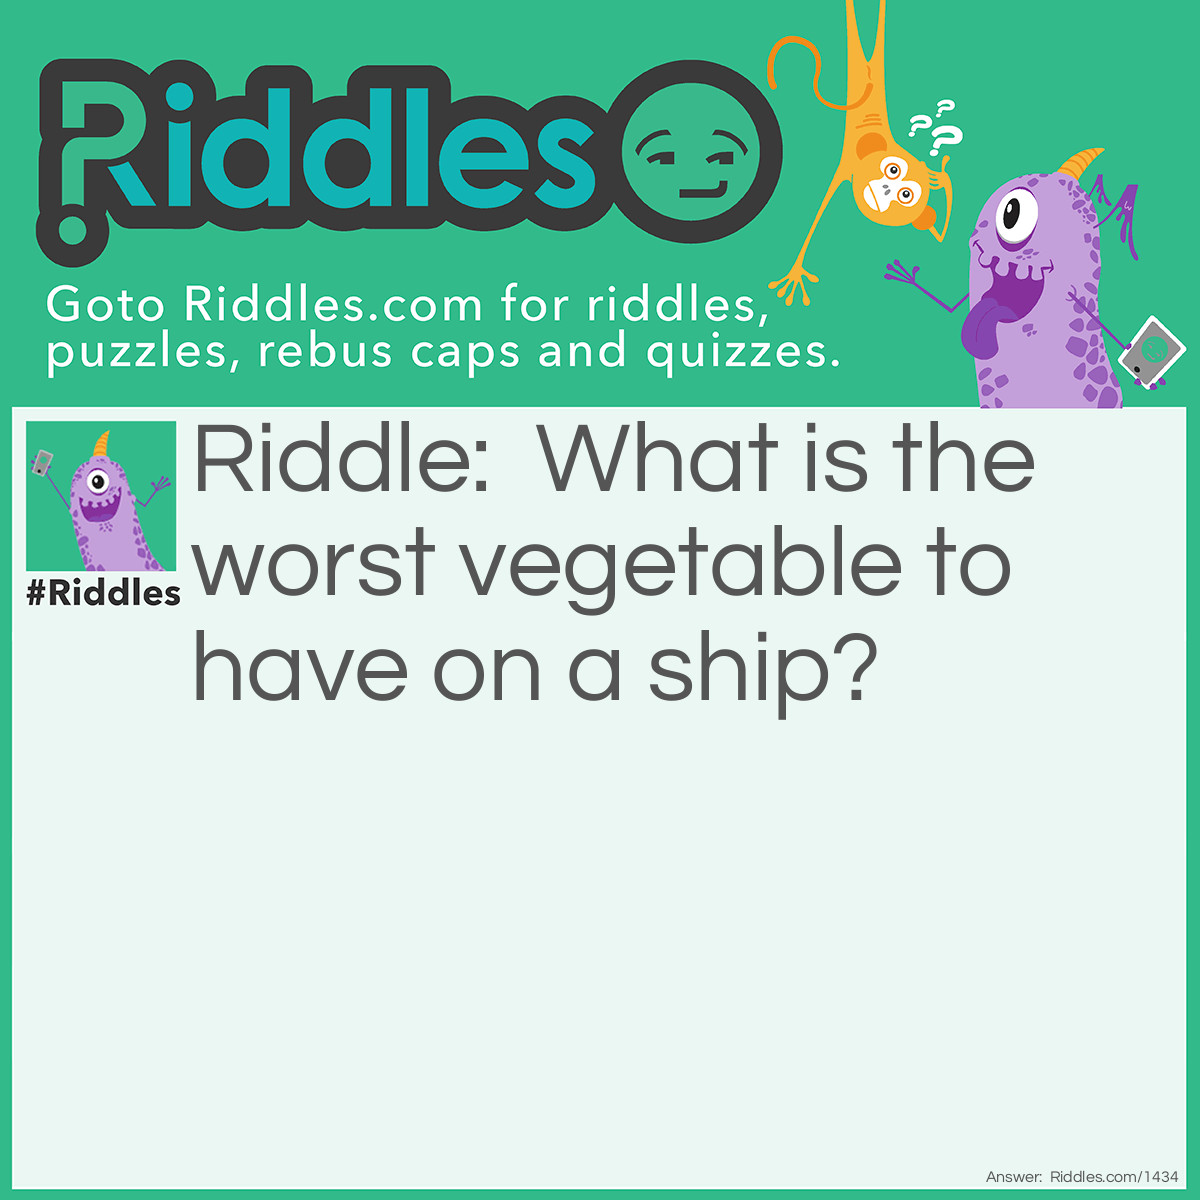 Riddle: What is the worst vegetable to have on a ship? Answer: A leek(leak).